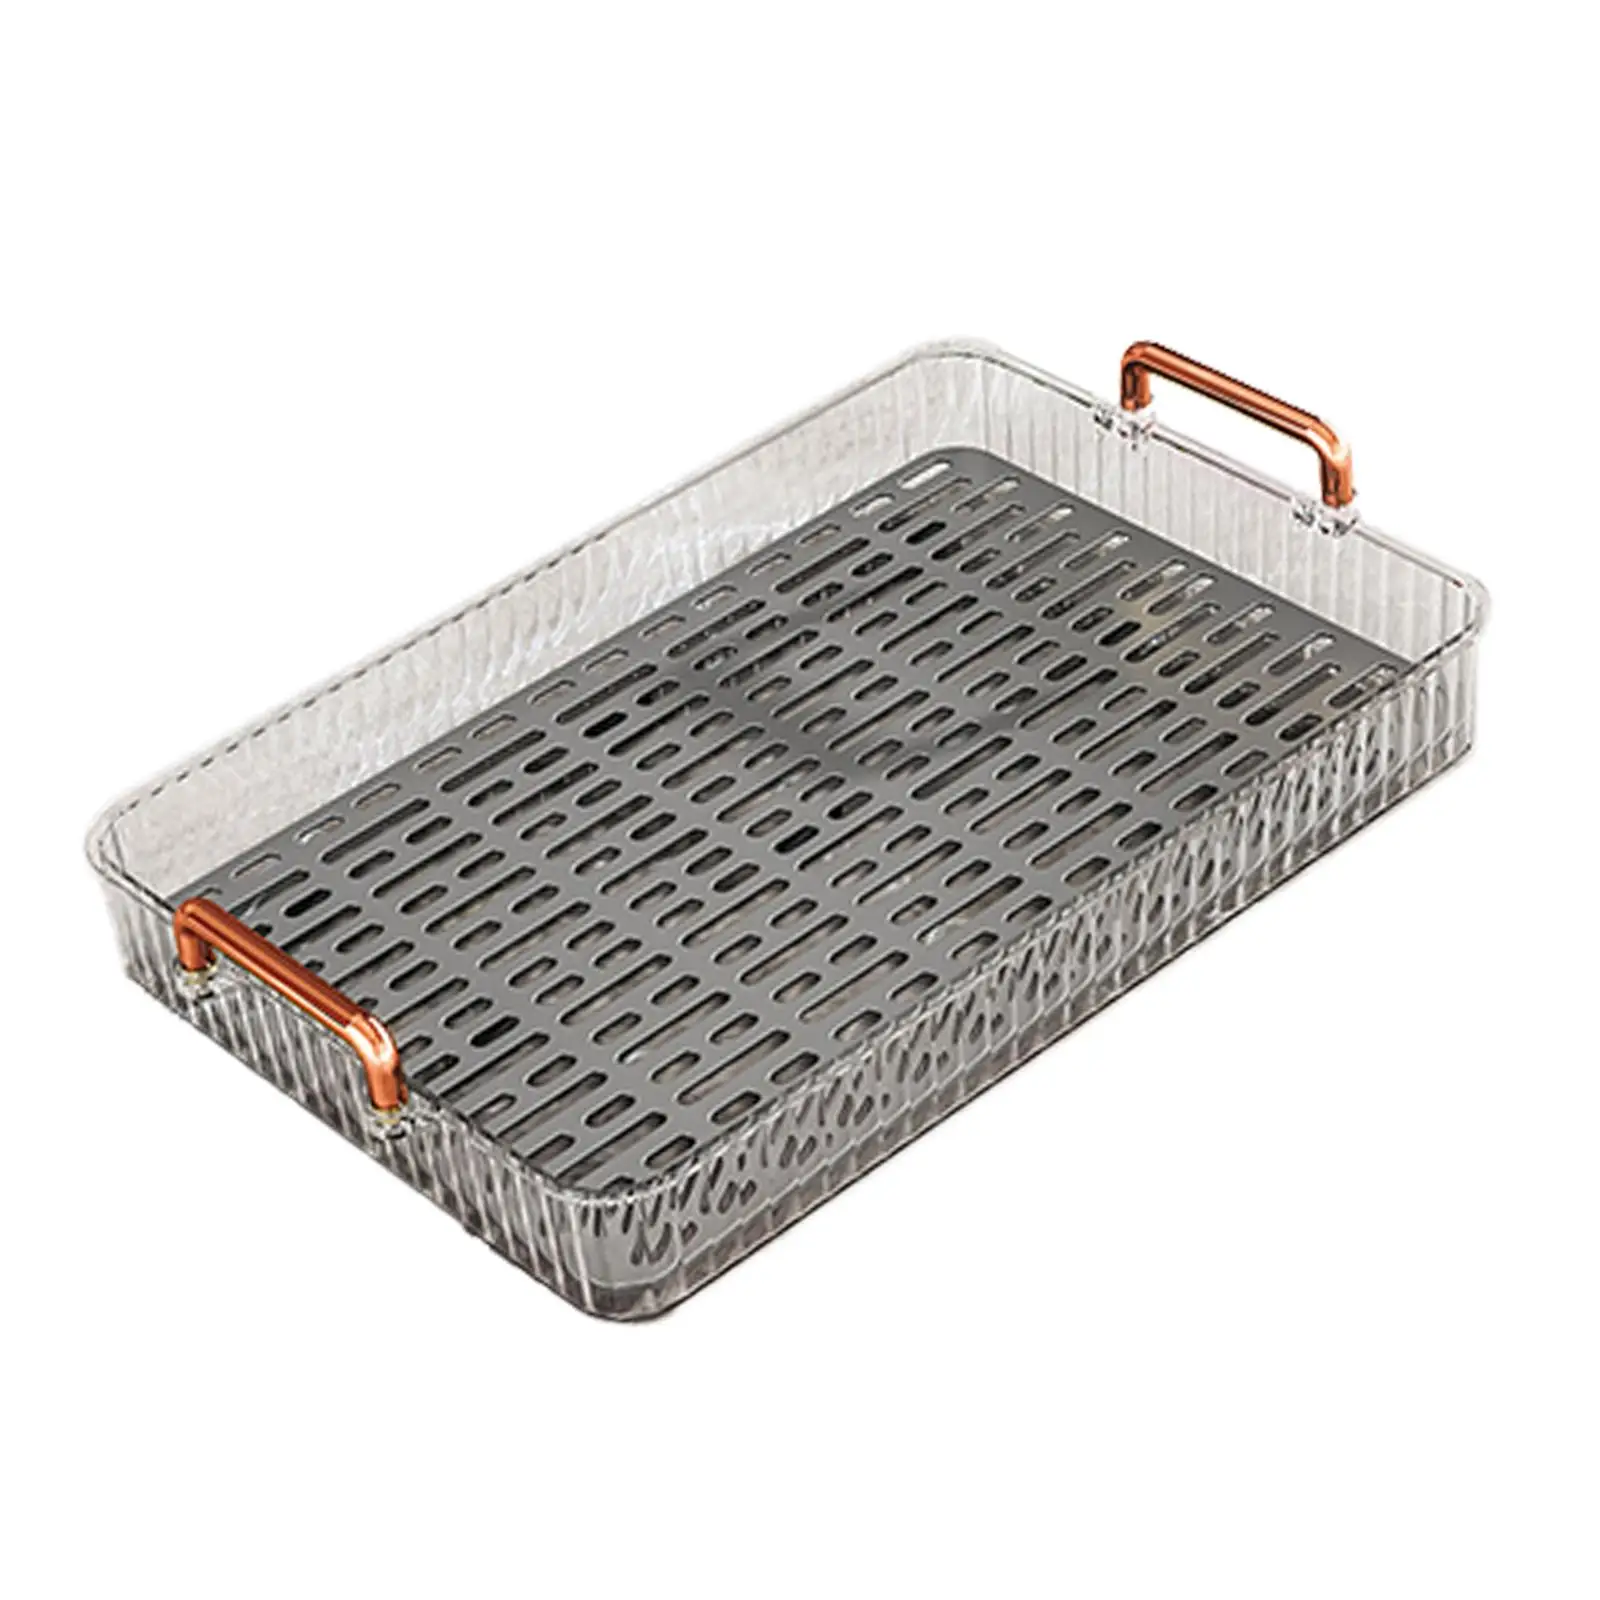 Serving Tray with Handles Drainer Tray Dessert Tray Nordic Style Hollow Design Tea Tray for Toilet Bathroom Home Party Organizer